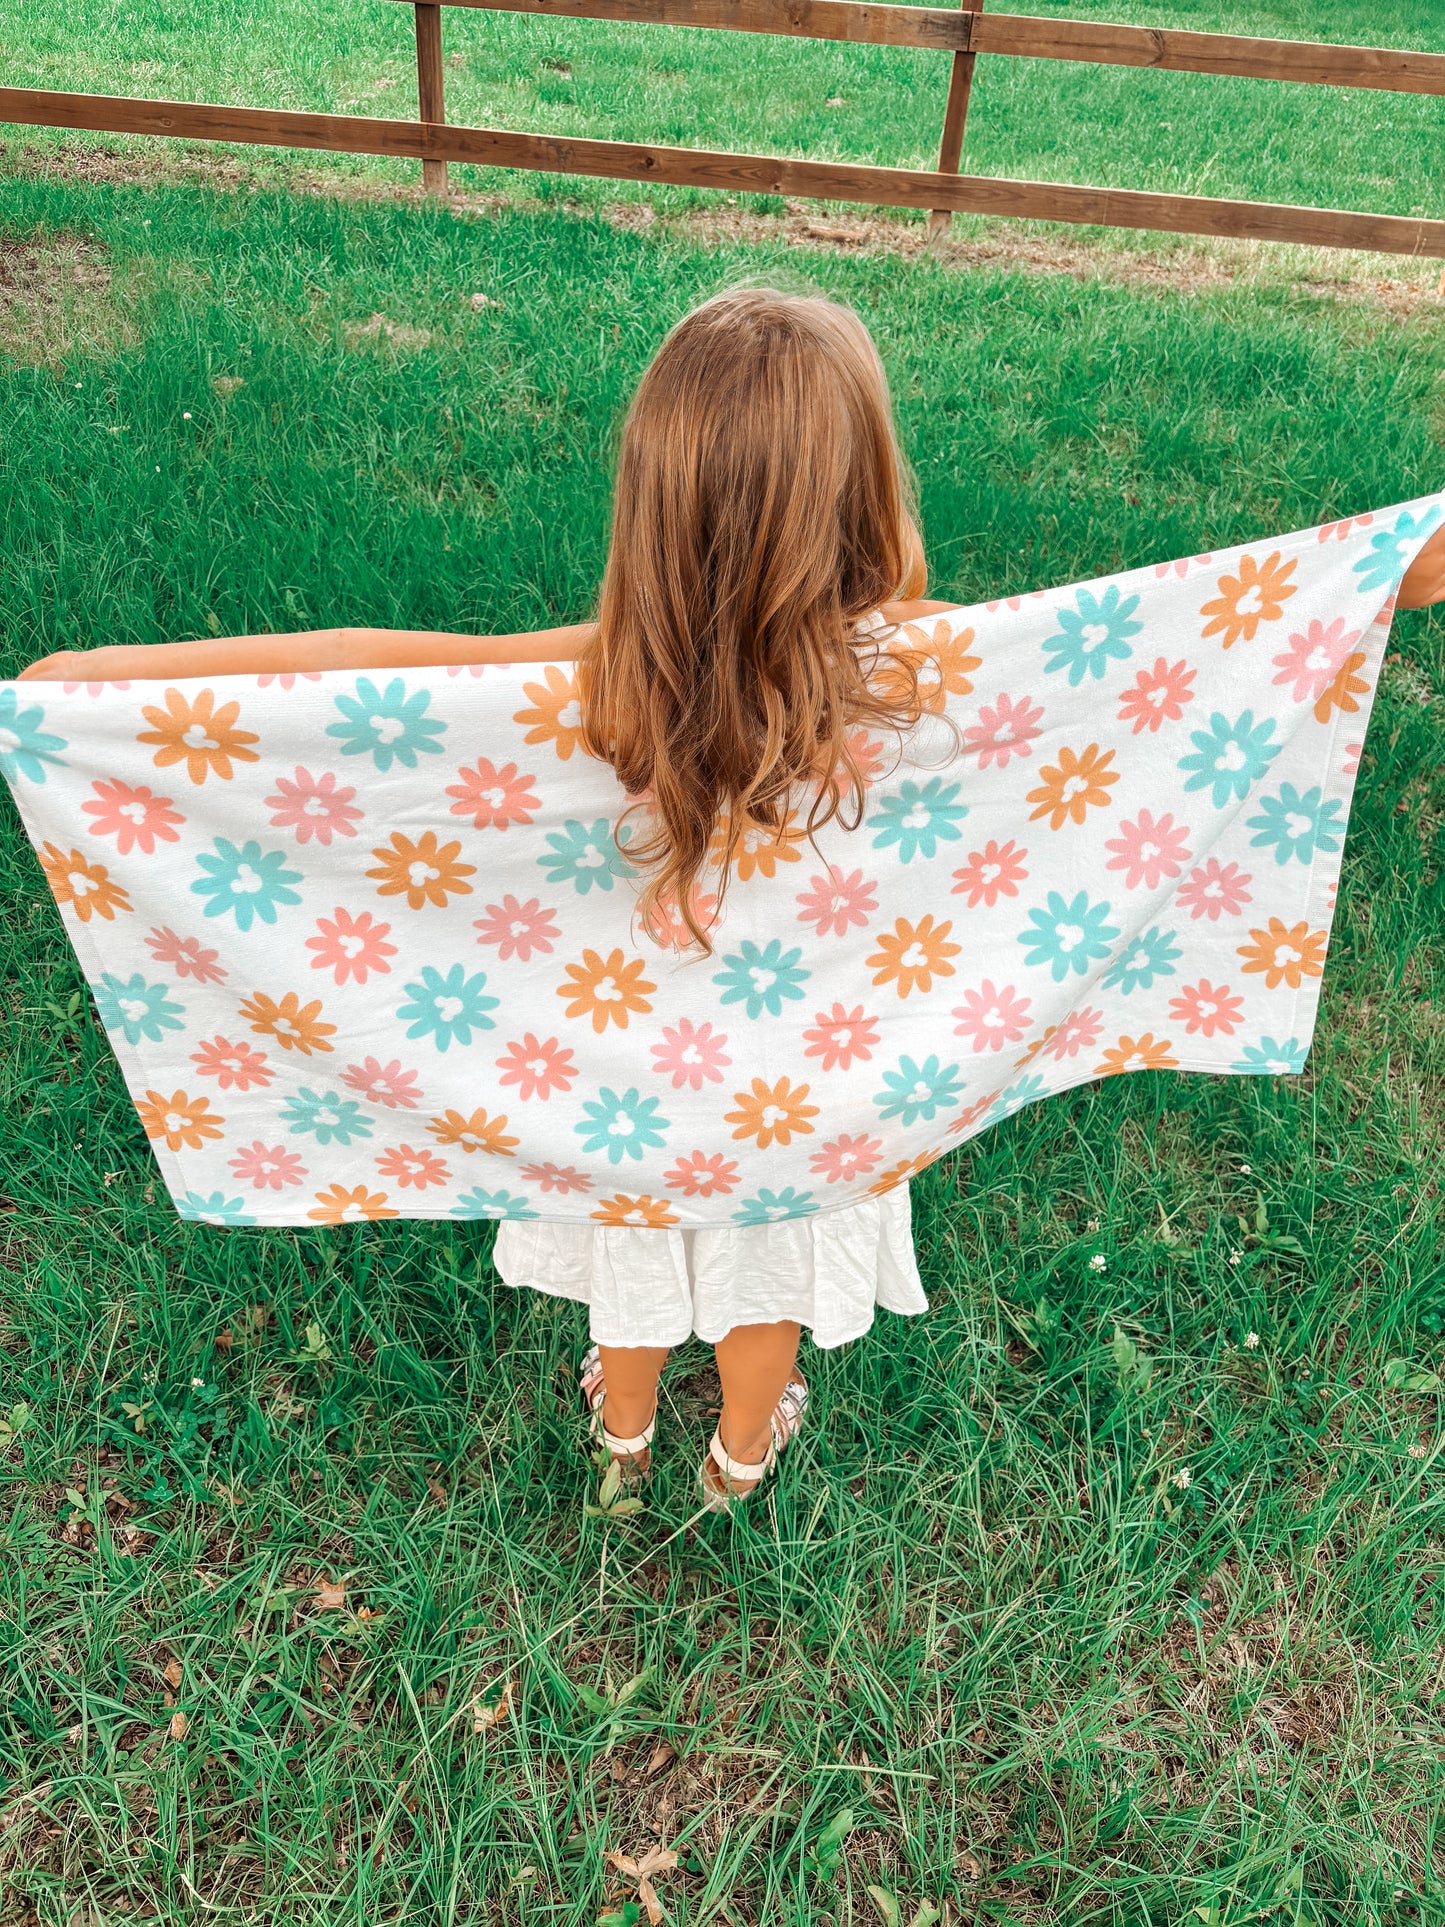 Finished Toddler Towel (Wholesale options after 4 towels)